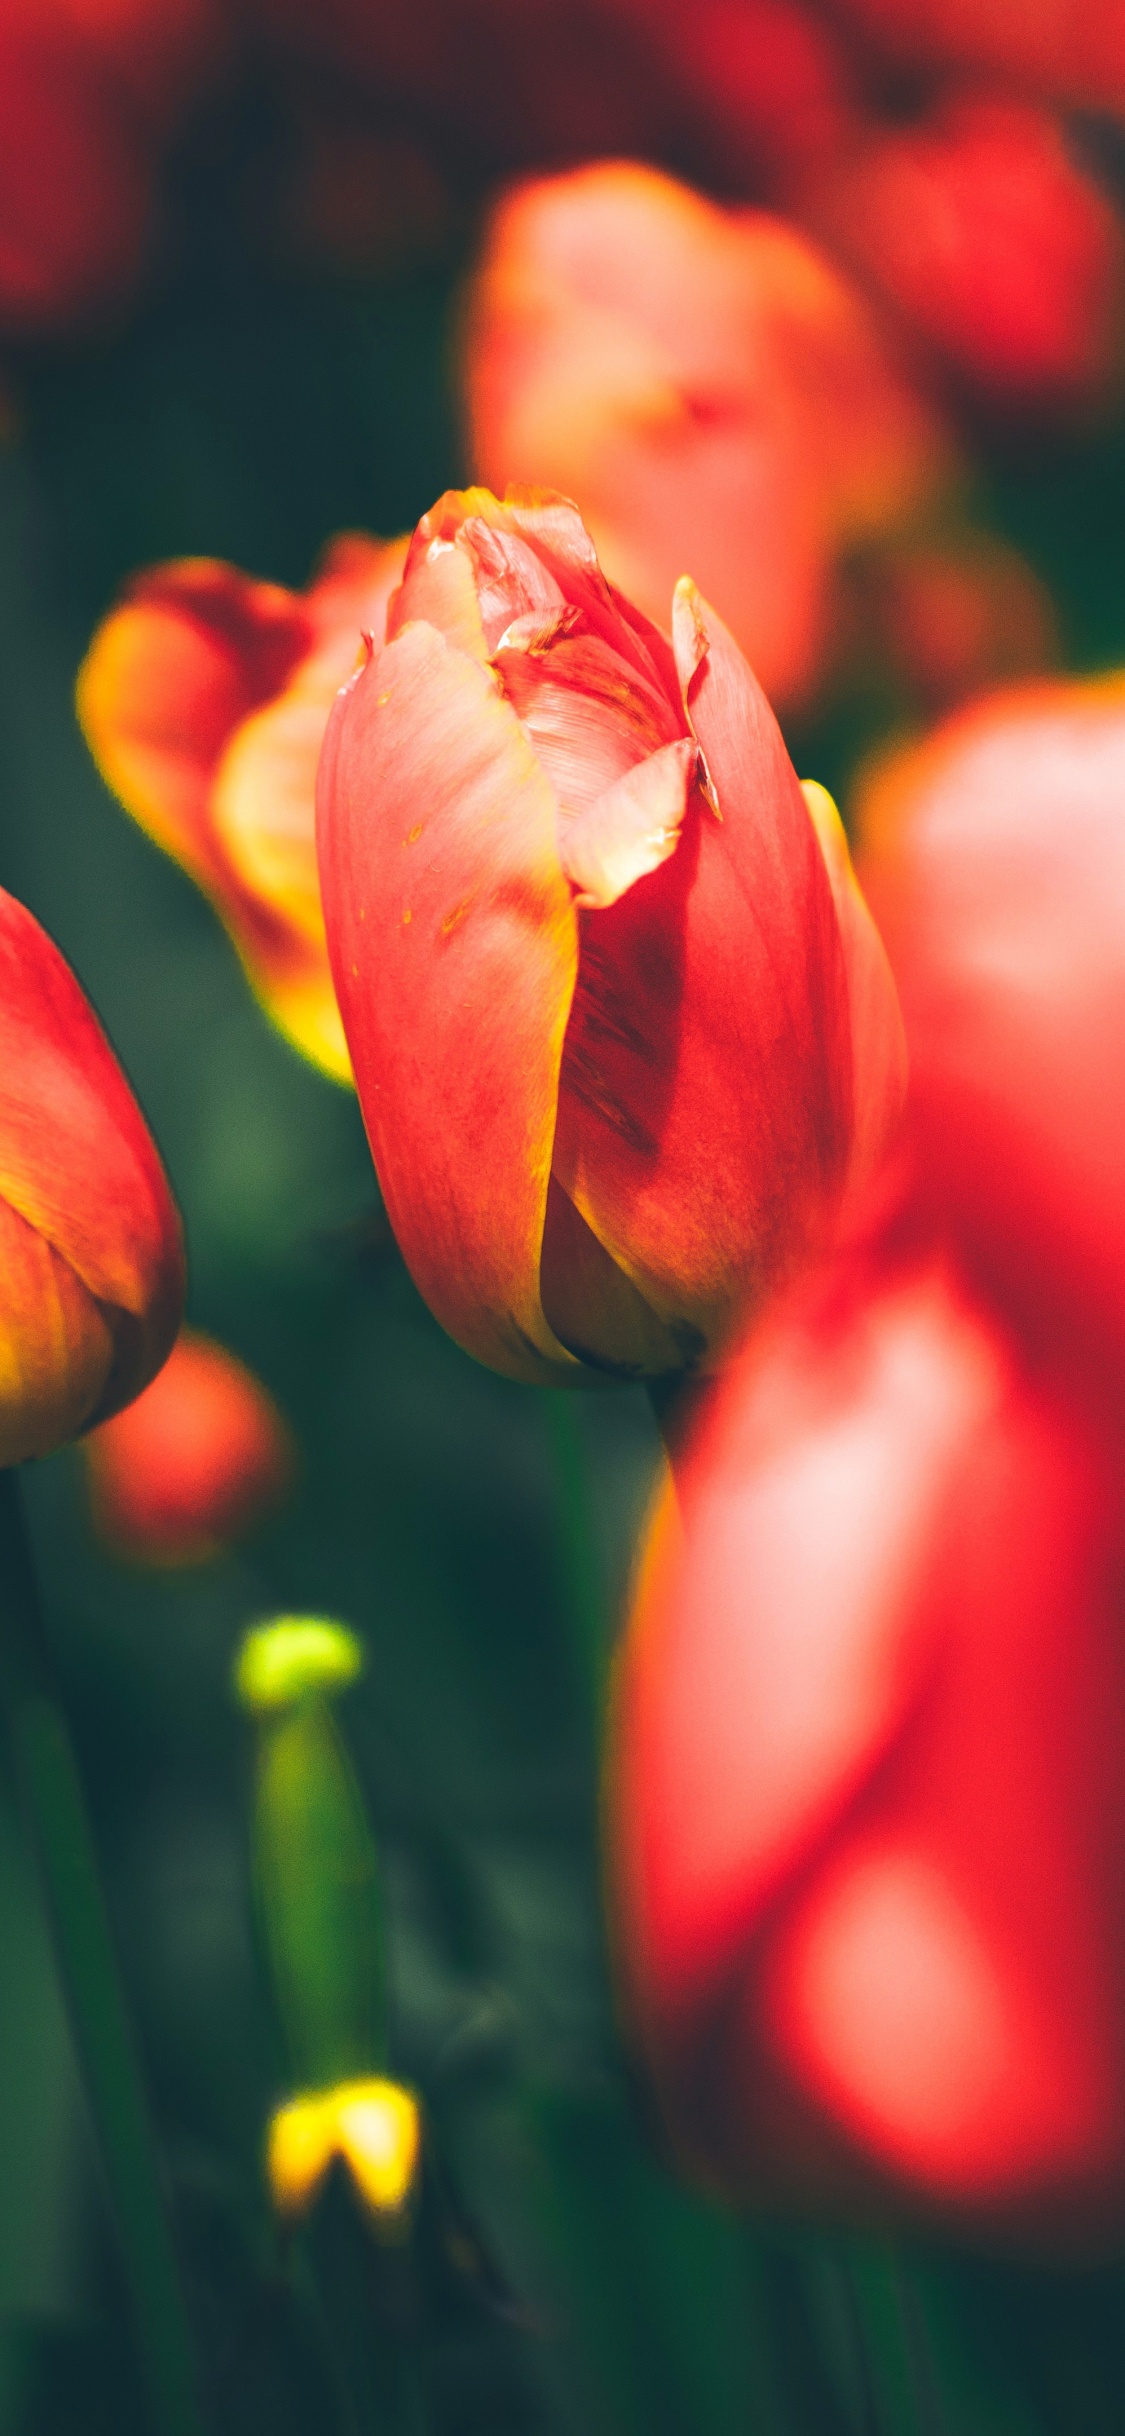 Red Tulips in Bloom During Daytime. Wallpaper in 1125x2436 Resolution